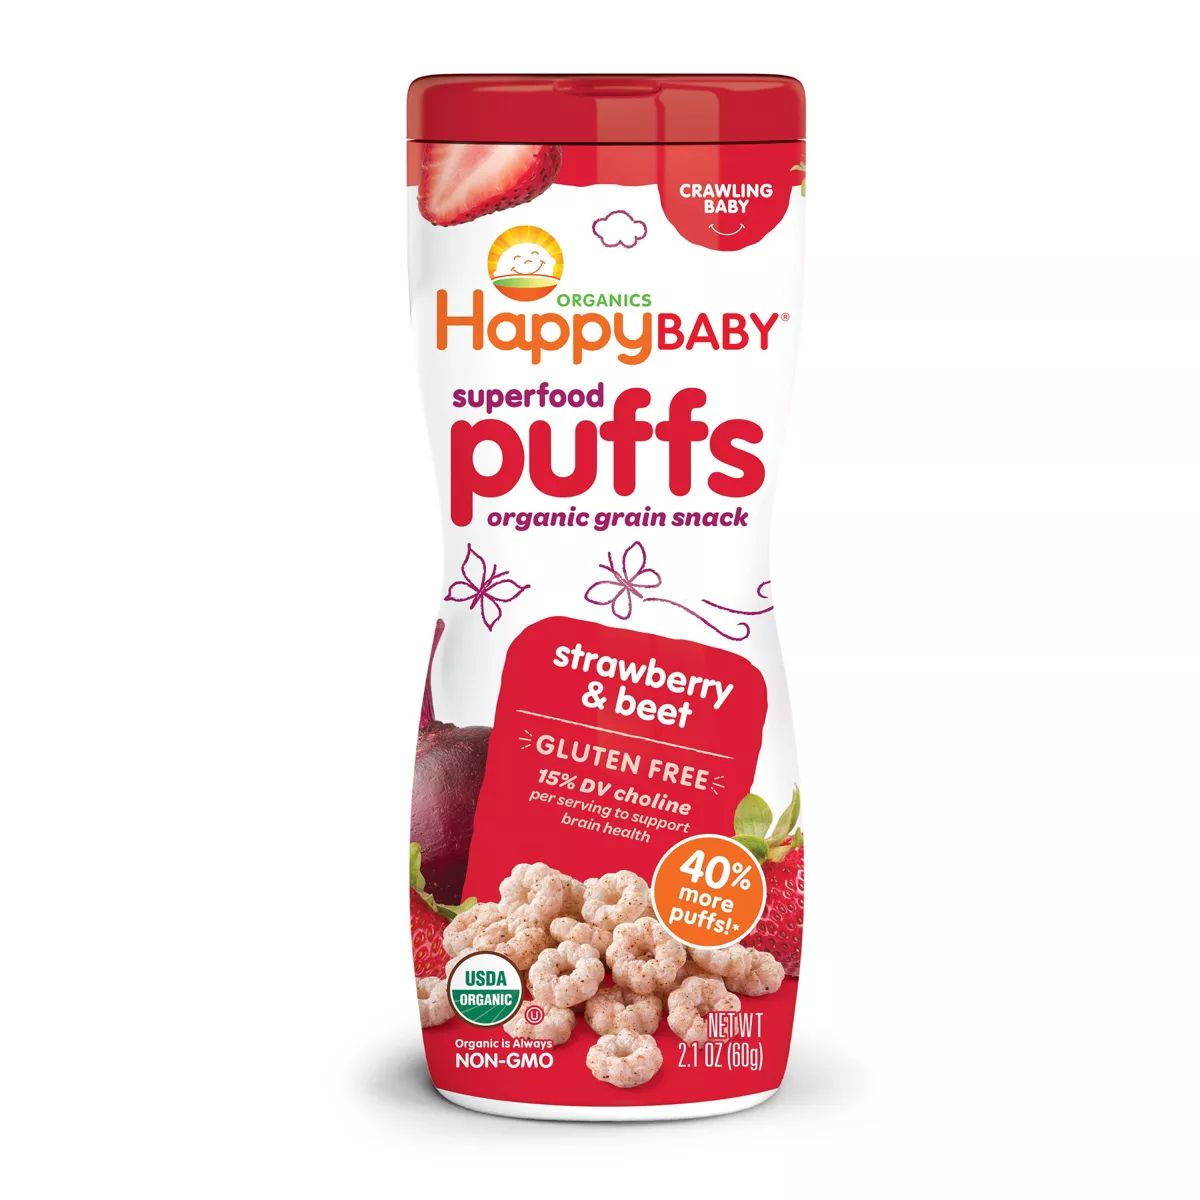 HappyBaby Strawberry & Beet Superfood Baby Puffs - 2.1oz | Target